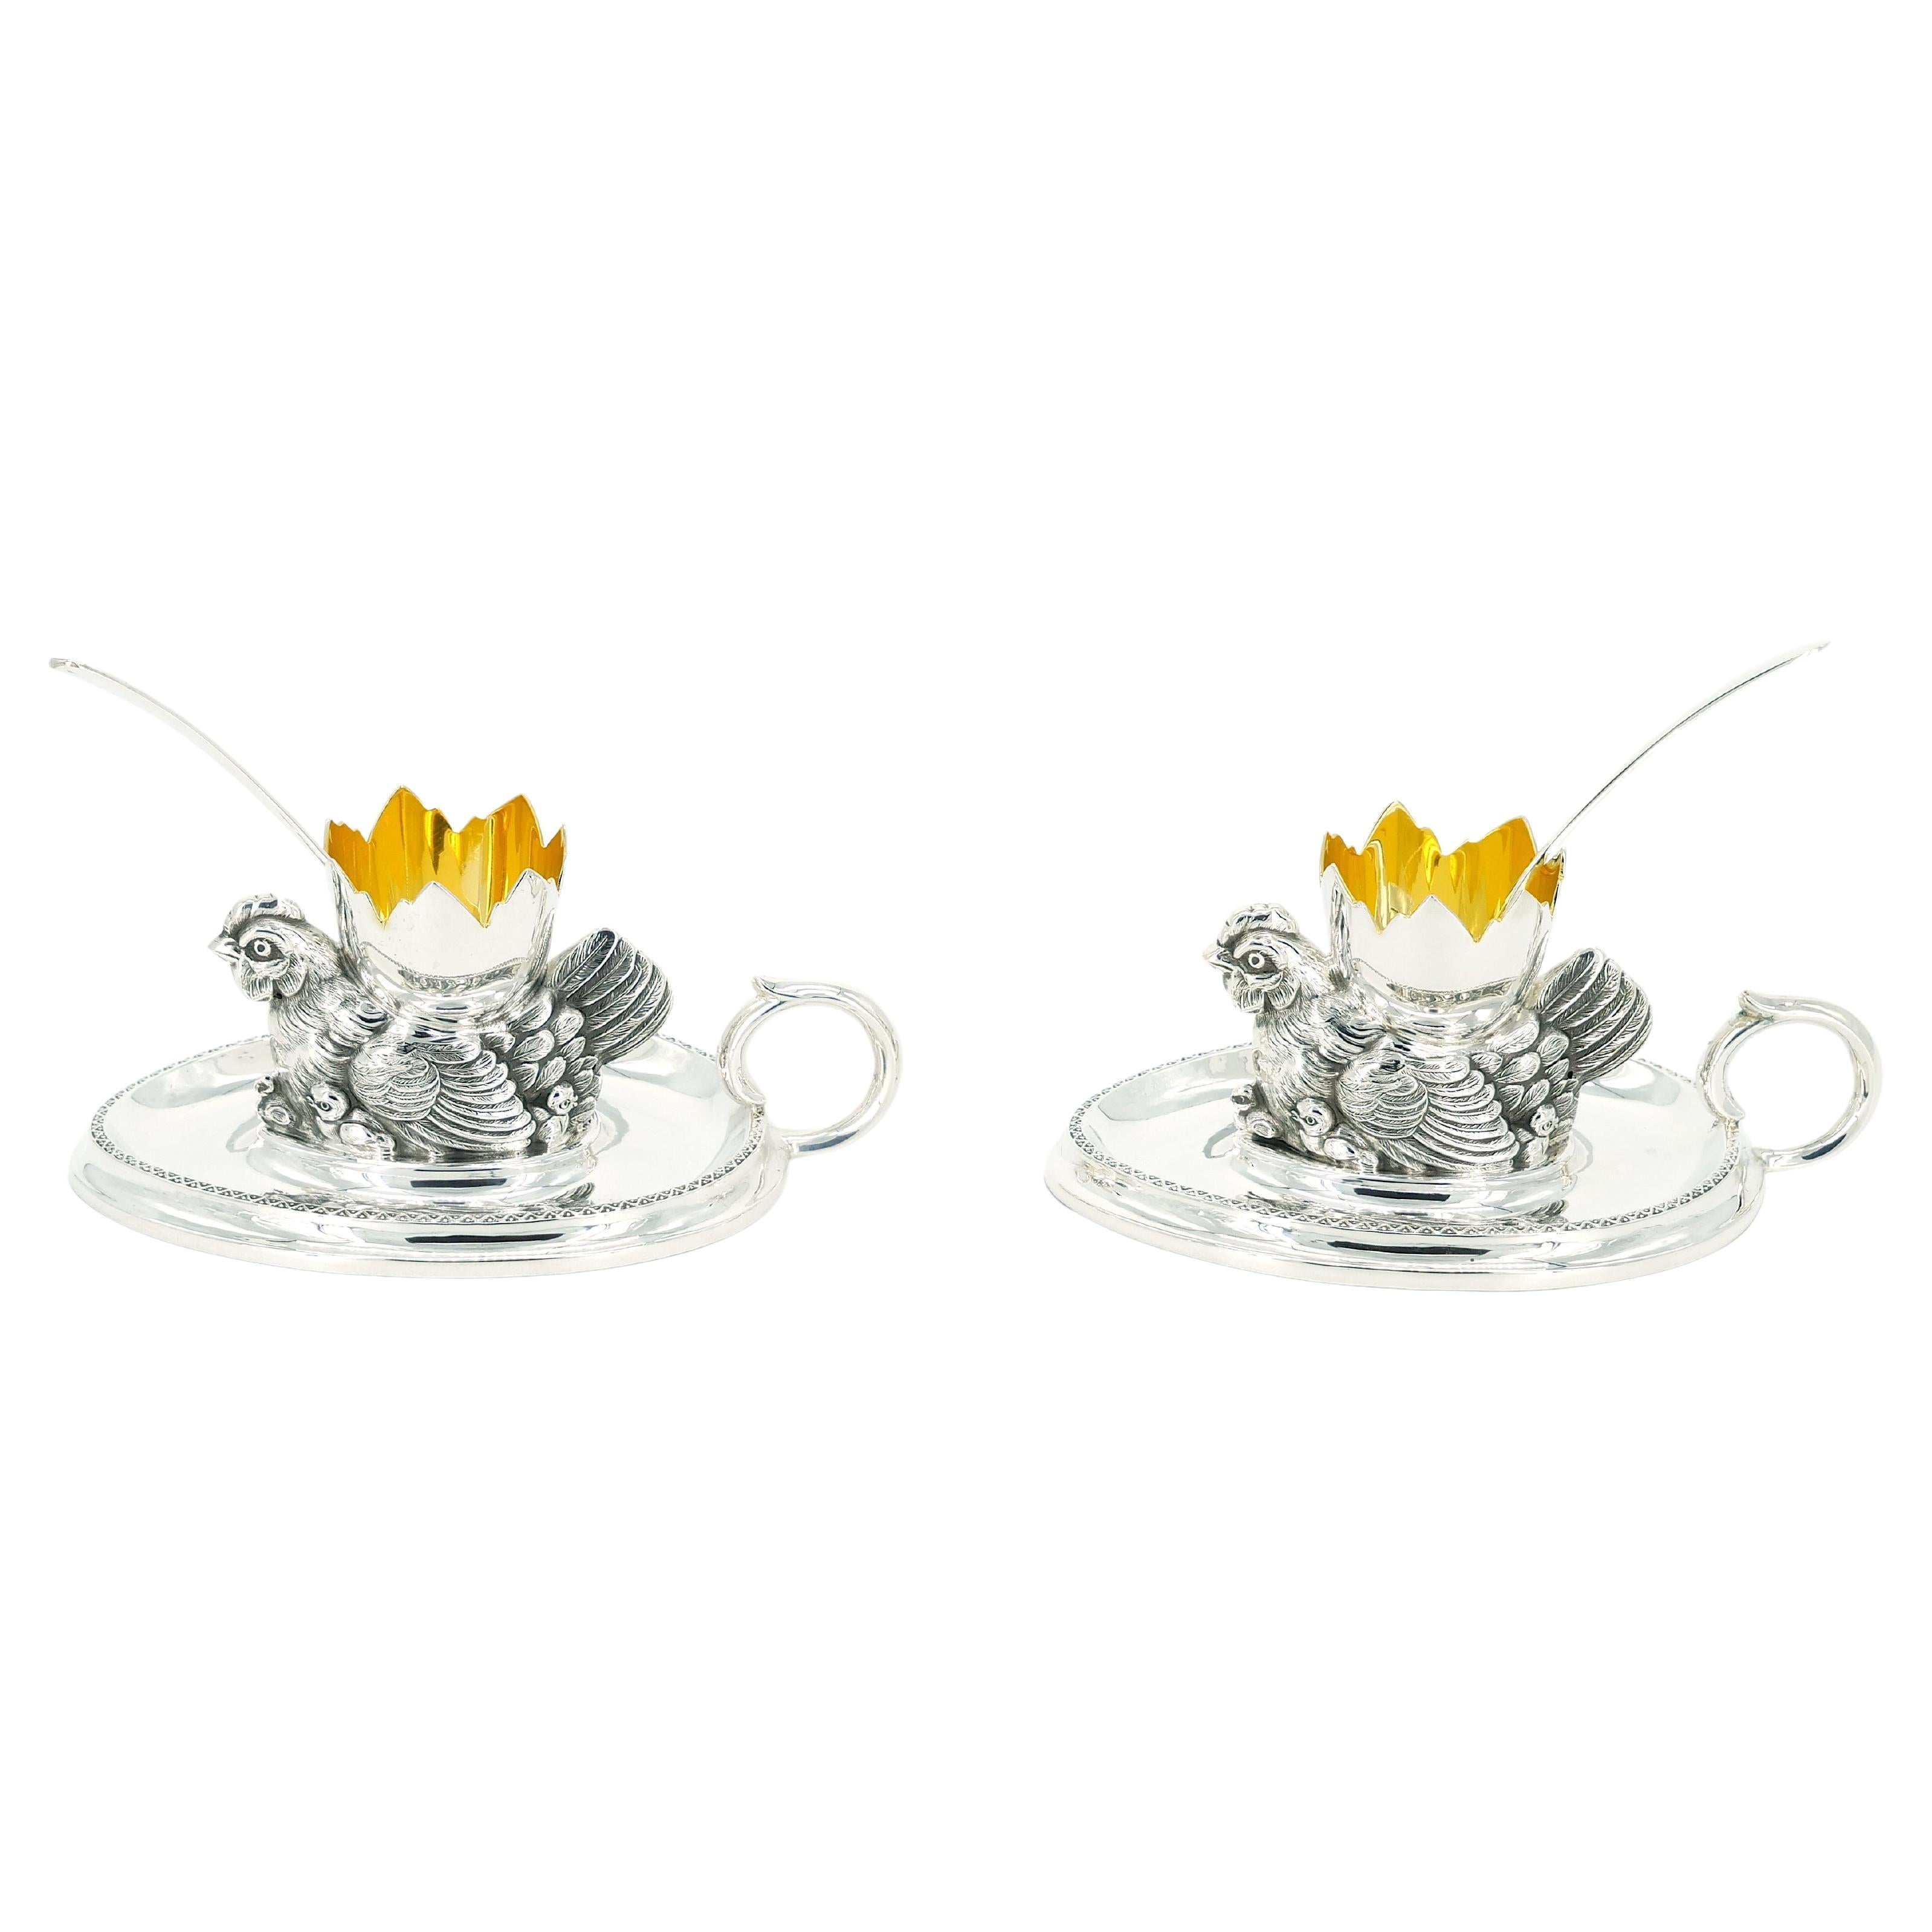 Indulge in the whimsical charm of our late 20th Century Italian Silver-Plated and Gold-Washed Interior Tableware – a delightful pair of serving soft boiled egg holder complete with a small spoon. These exquisite pieces showcase Italian craftsmanship